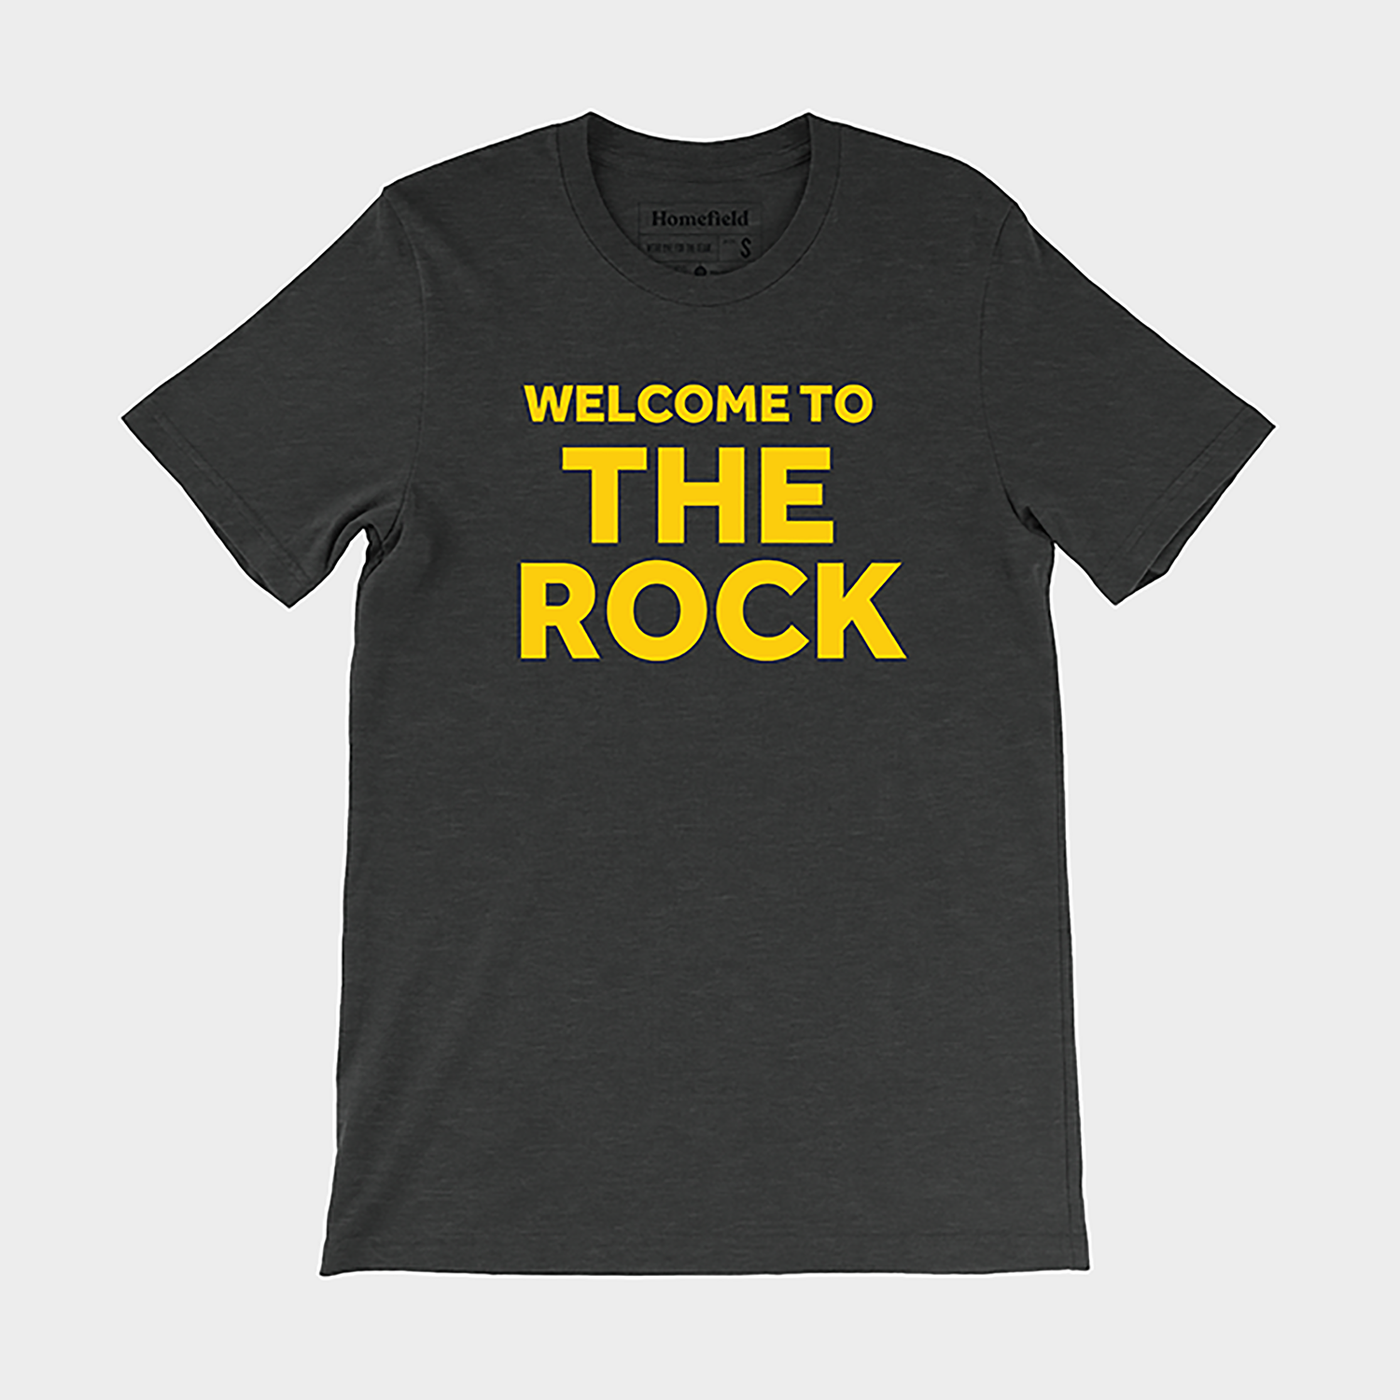 The Rock App State T-Shirt